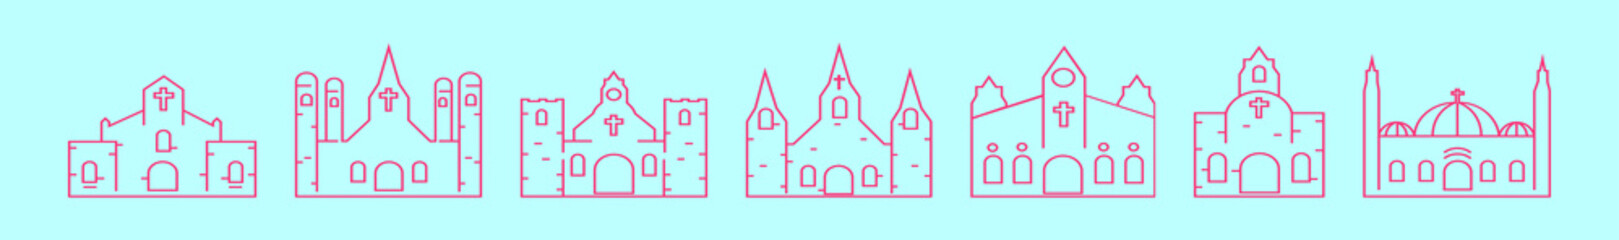 set of church cartoon icon design template with various models. vector illustration isolated on blue background